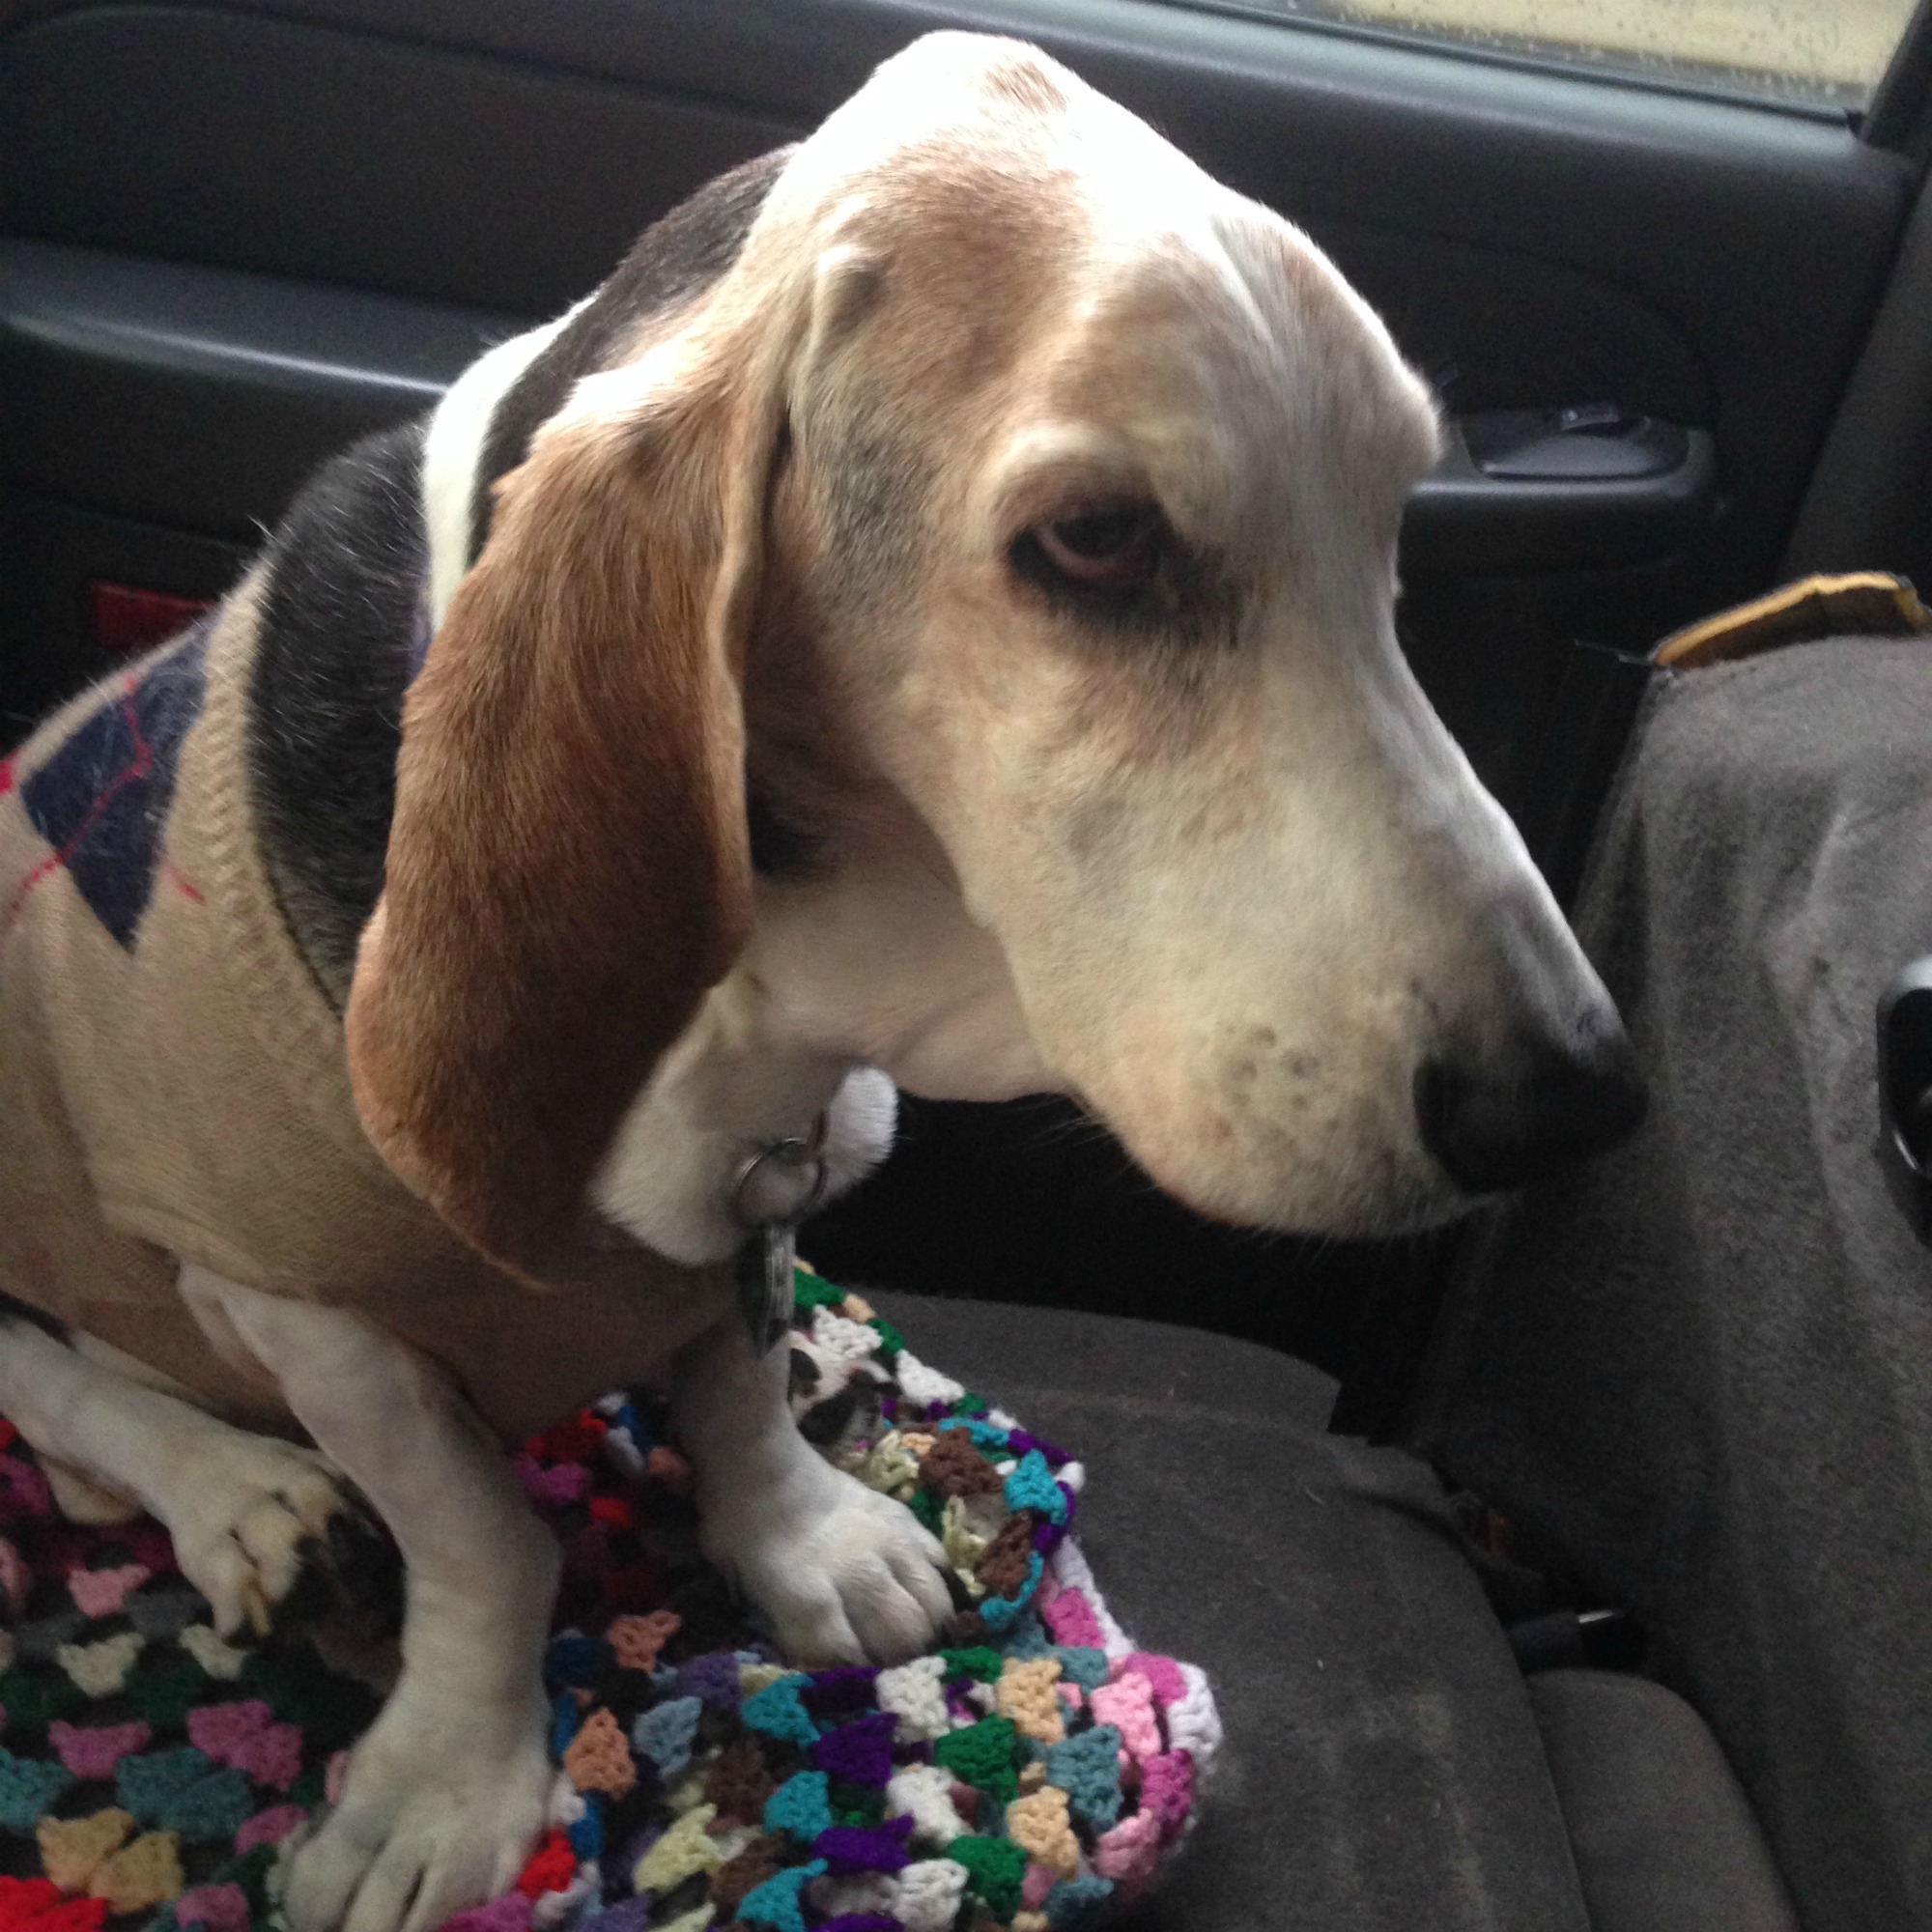 Why do basset hounds smell bad?